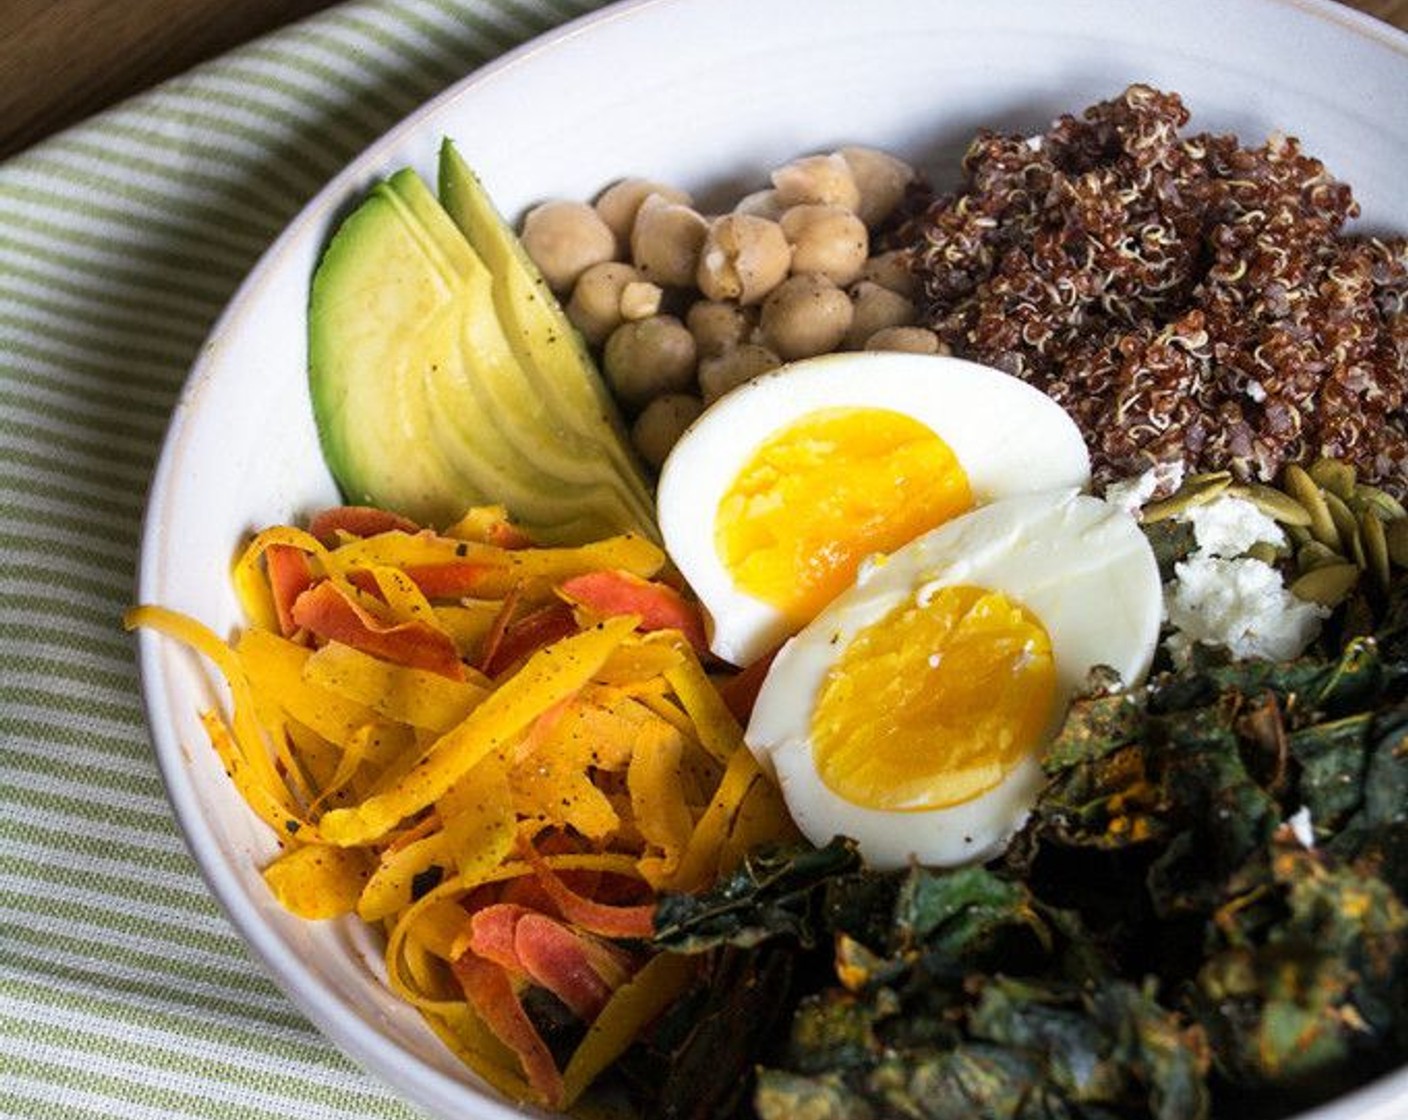 step 10 In two bowls, add cooked quinoa, baked kale chips, Canned Chickpeas (1/2 cup), shaved carrots, Avocado (1/2), Goat Cheese (2 Tbsp) and Pepitas (2 Tbsp) then top with soft boiled egg and sprinkle with salt and pepper if desired.